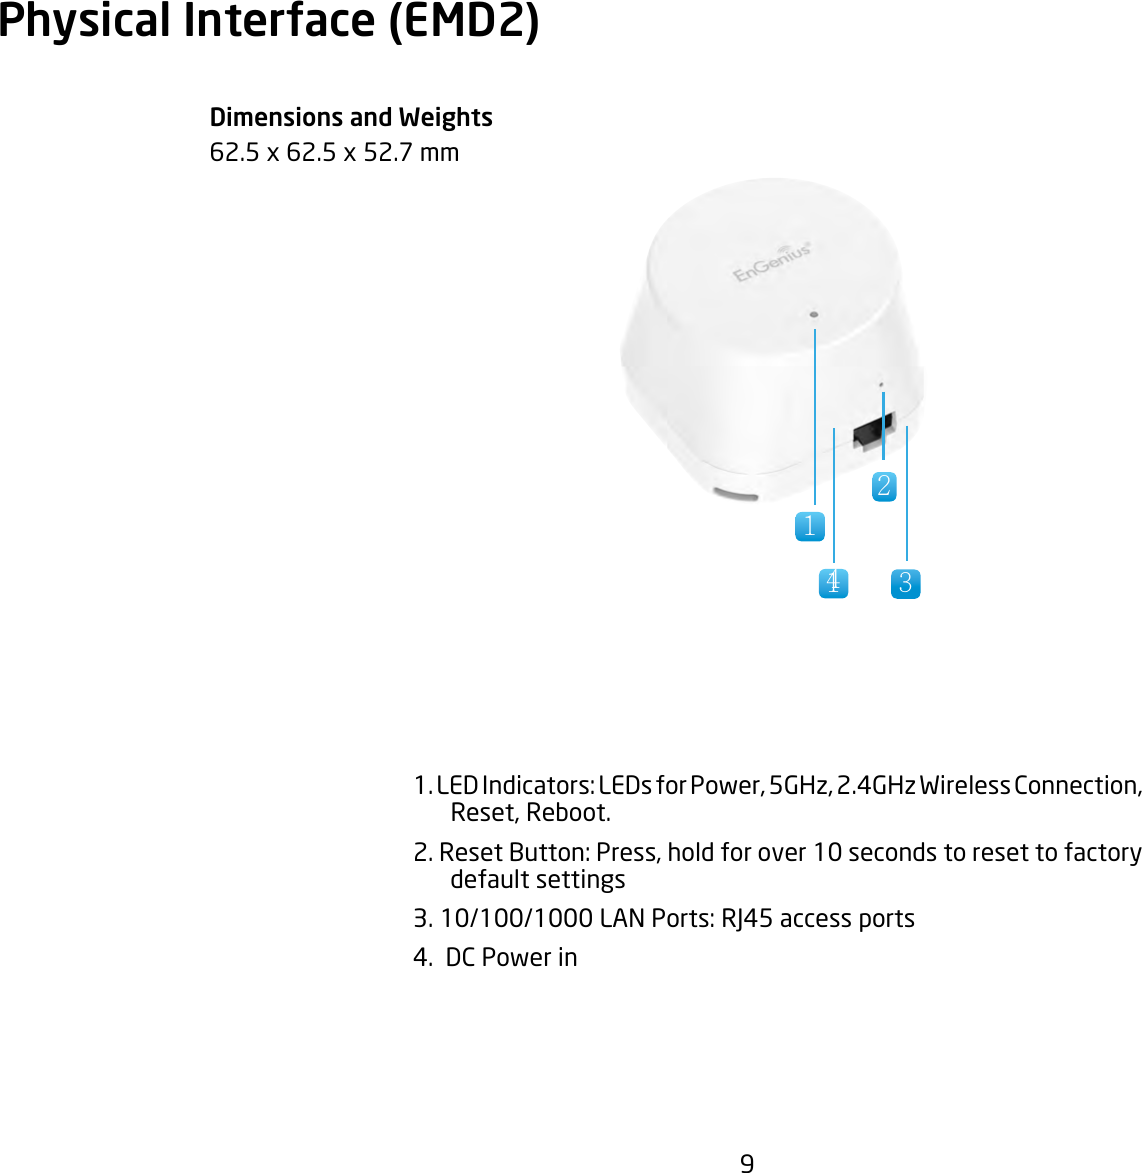 9Physical Interface (EMD2)Dimensions and Weights62.5x62.5x52.7mm 1.LEDIndicators:LEDsforPower,5GHz,2.4GHzWirelessConnection,Reset, Reboot.2.ResetButton:Press,holdforover10secondstoresettofactorydefault settings3.10/100/1000LANPorts:RJ45accessports4.  DC Power in1 2341 